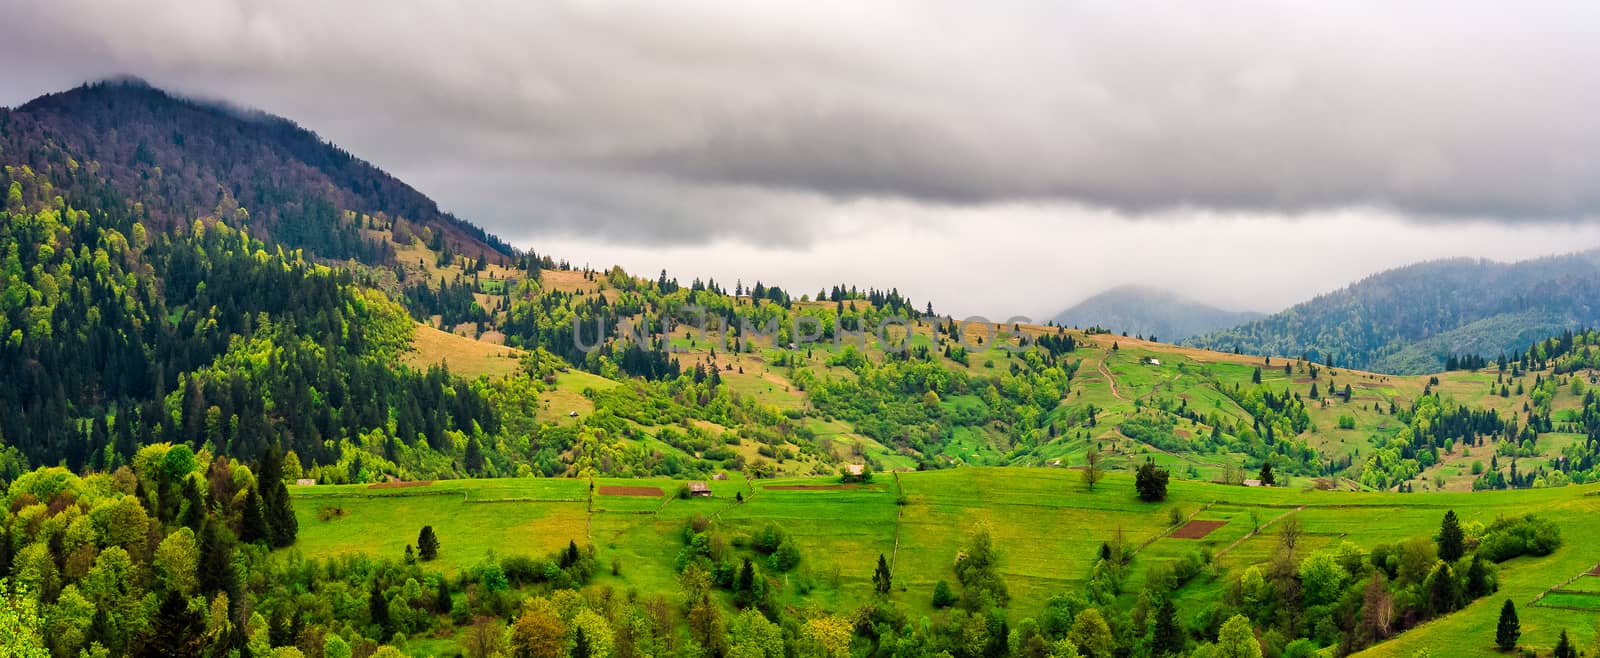 rural area in mountains on overcast day. woodsheds, fences and grassy fields on hills. beautiful countryside landscape